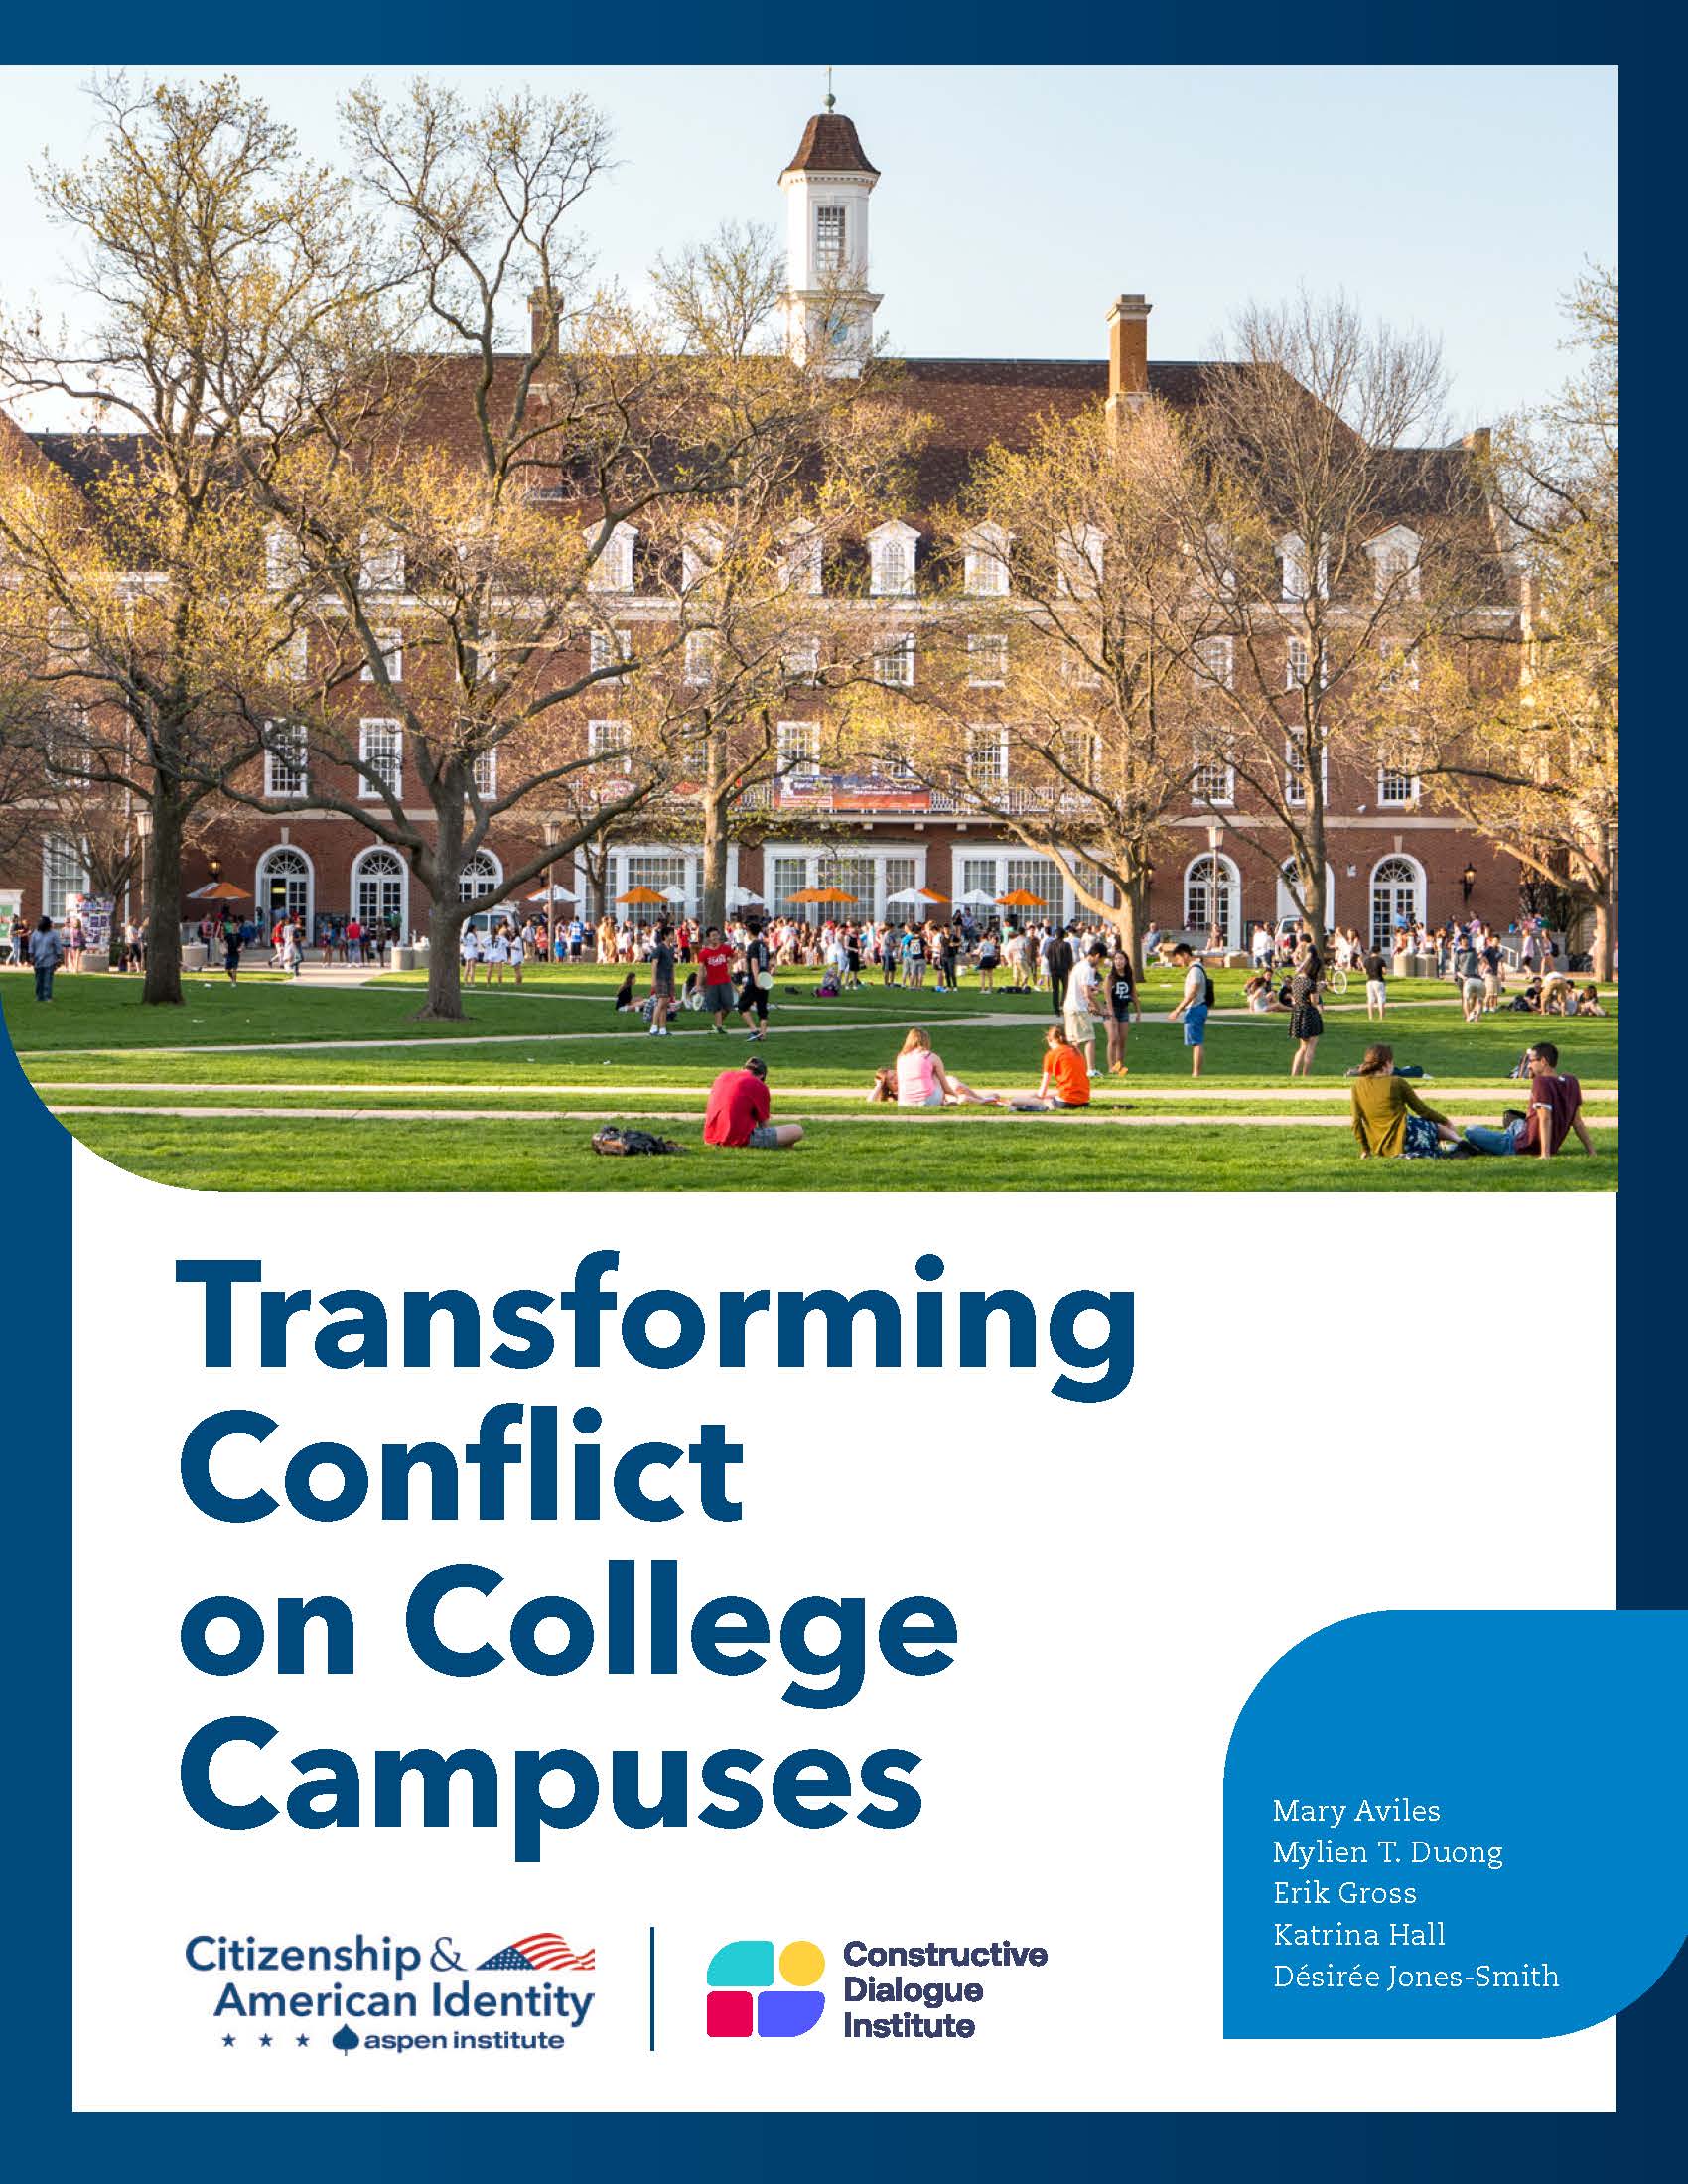 Transforming Conflict on College Campuses